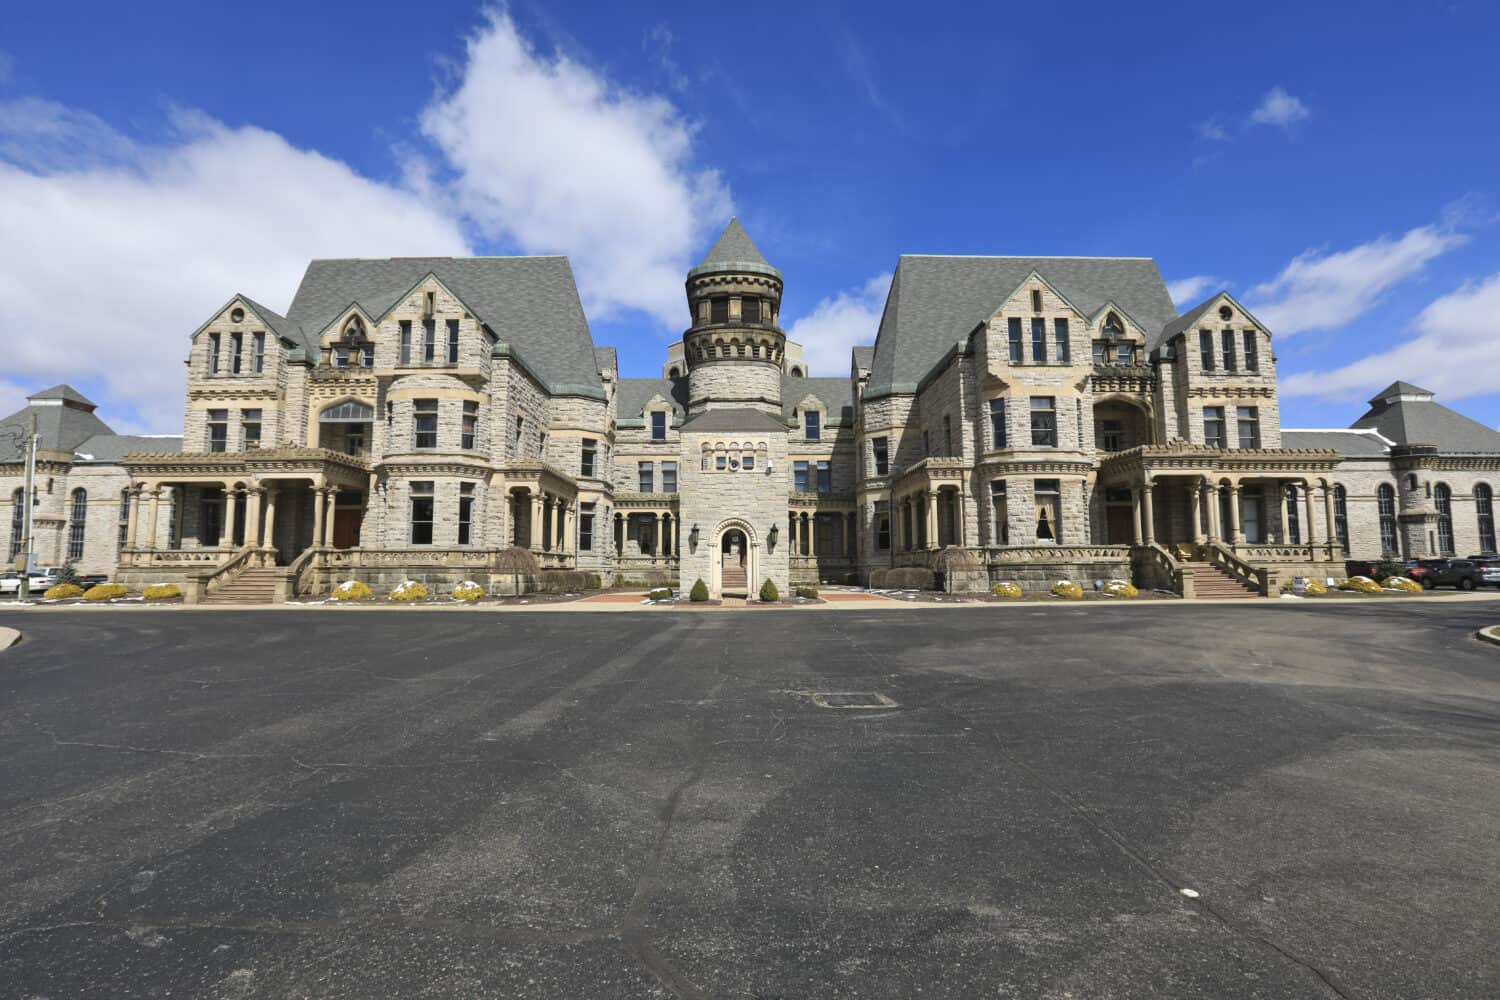 The Ohio State Reformatory in Mansfield Ohio is on the register of historical places. Tours operate daily, making it a popular tourist attraction.